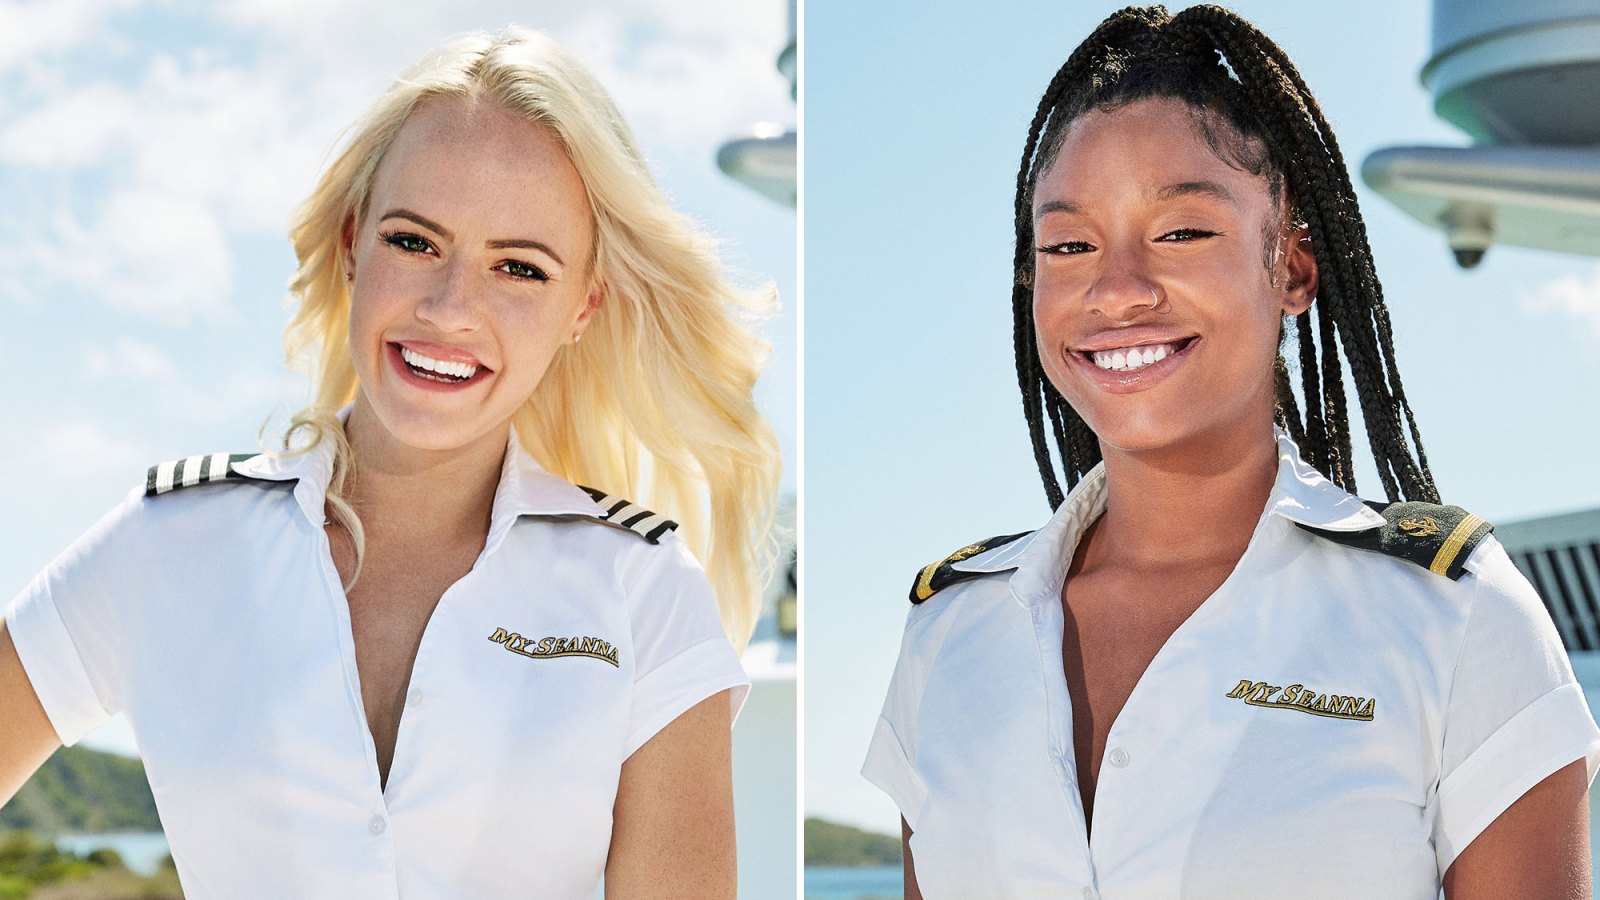 Below Deck's Heather Chase Apologizes for Her Ignorance After Using N-Word While Speaking to Costar Rayna Lindsey